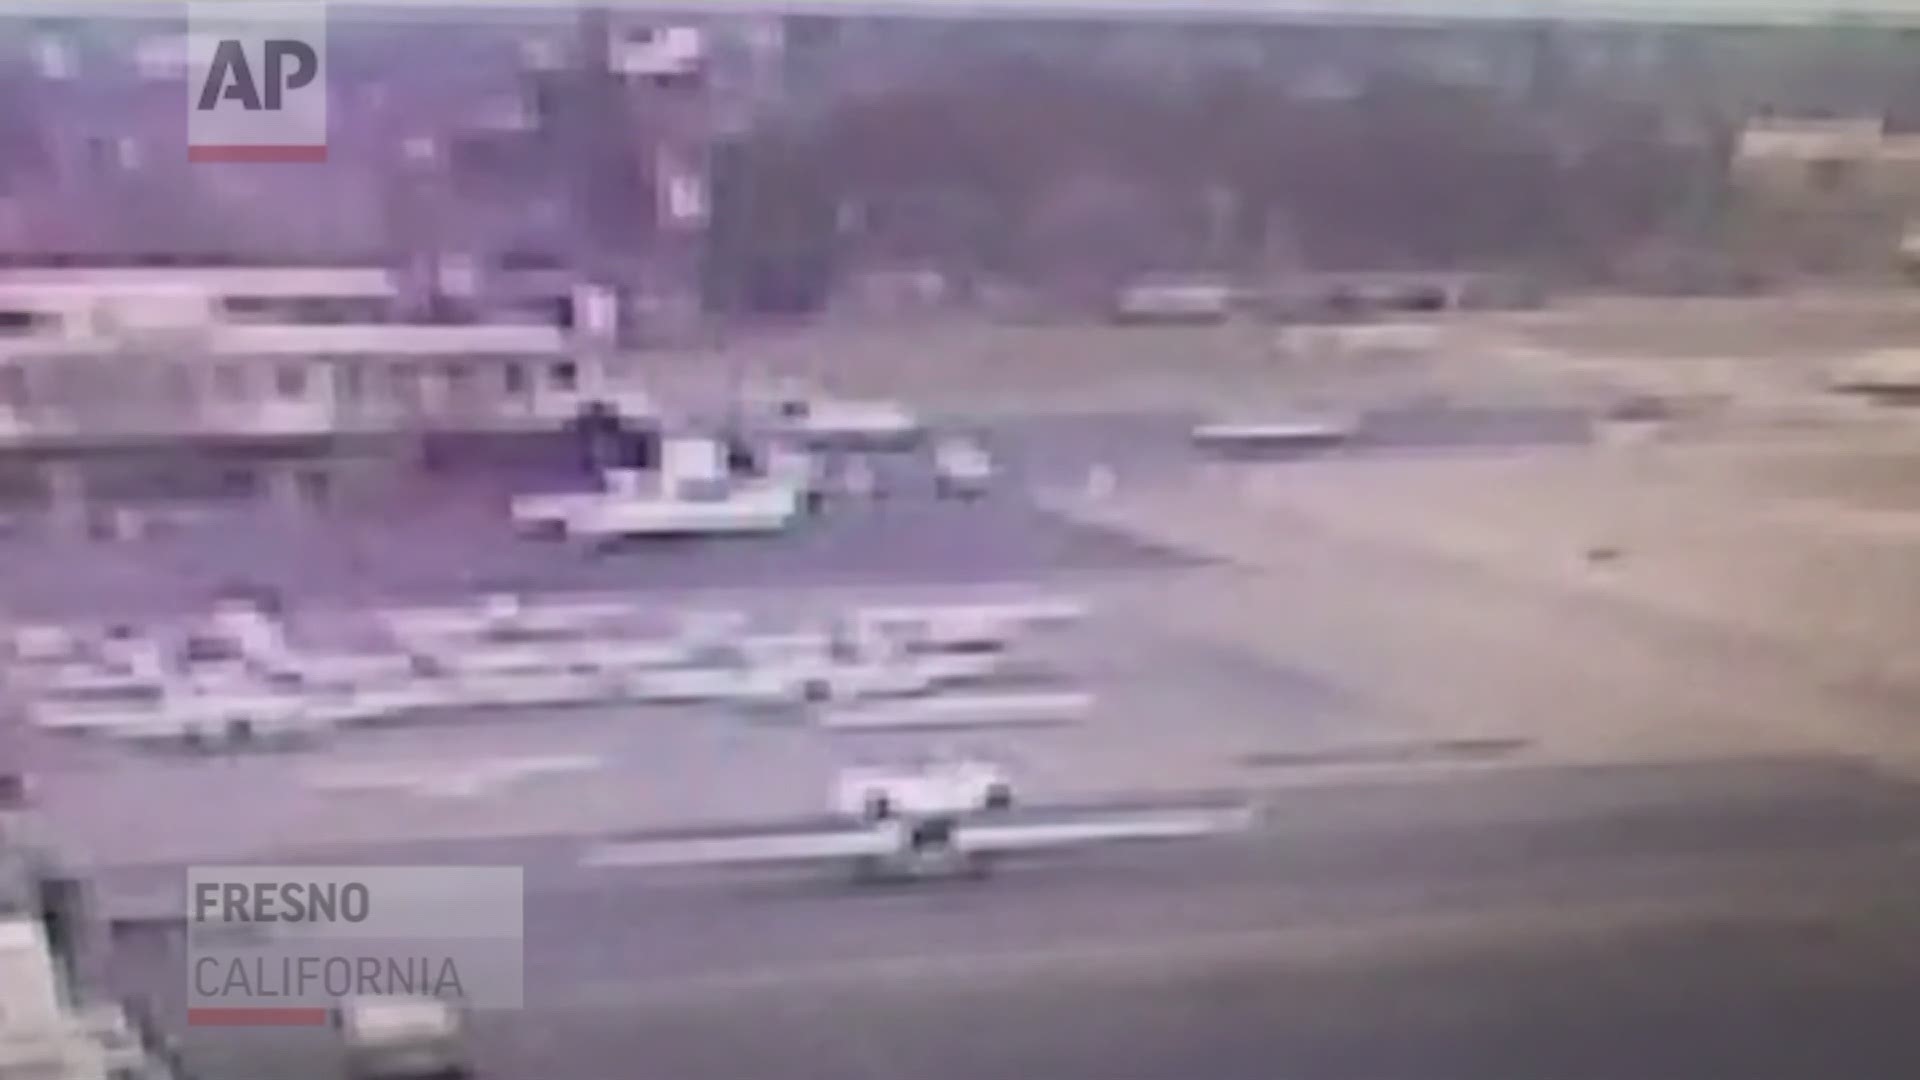 A 17-year-old girl has been arrested after authorities say she sneaked into a small plane at a central California airport and drove it into a chain-link fence.